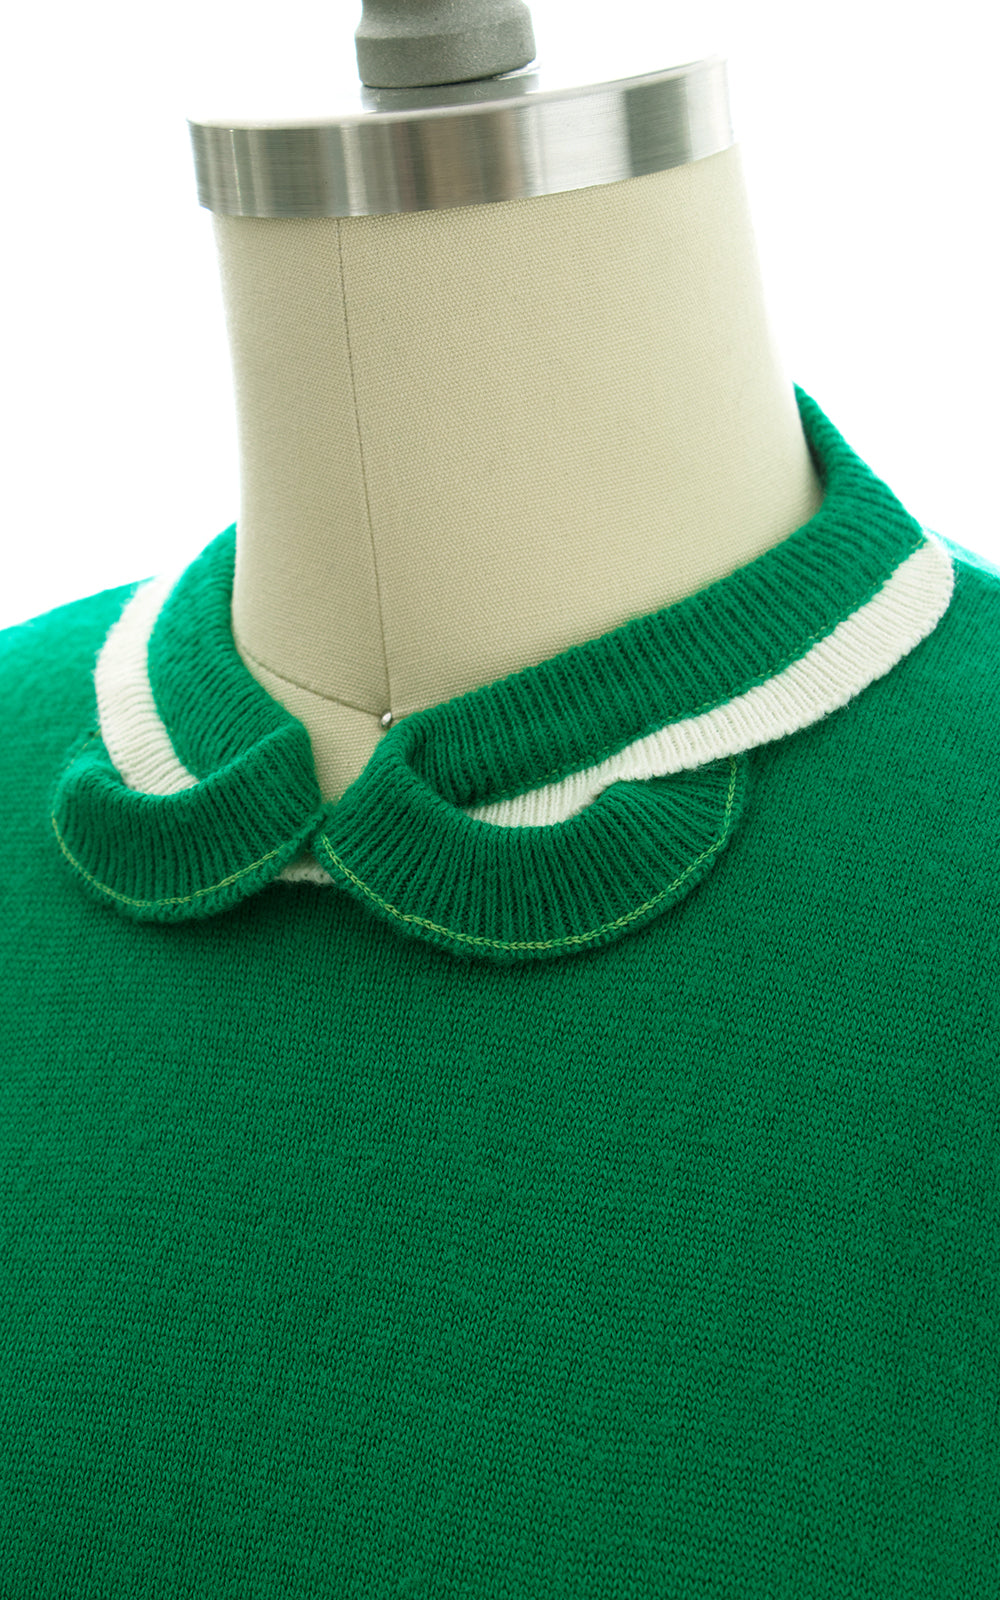 1950s Kelly Green Acrylic Knit Sweater Top